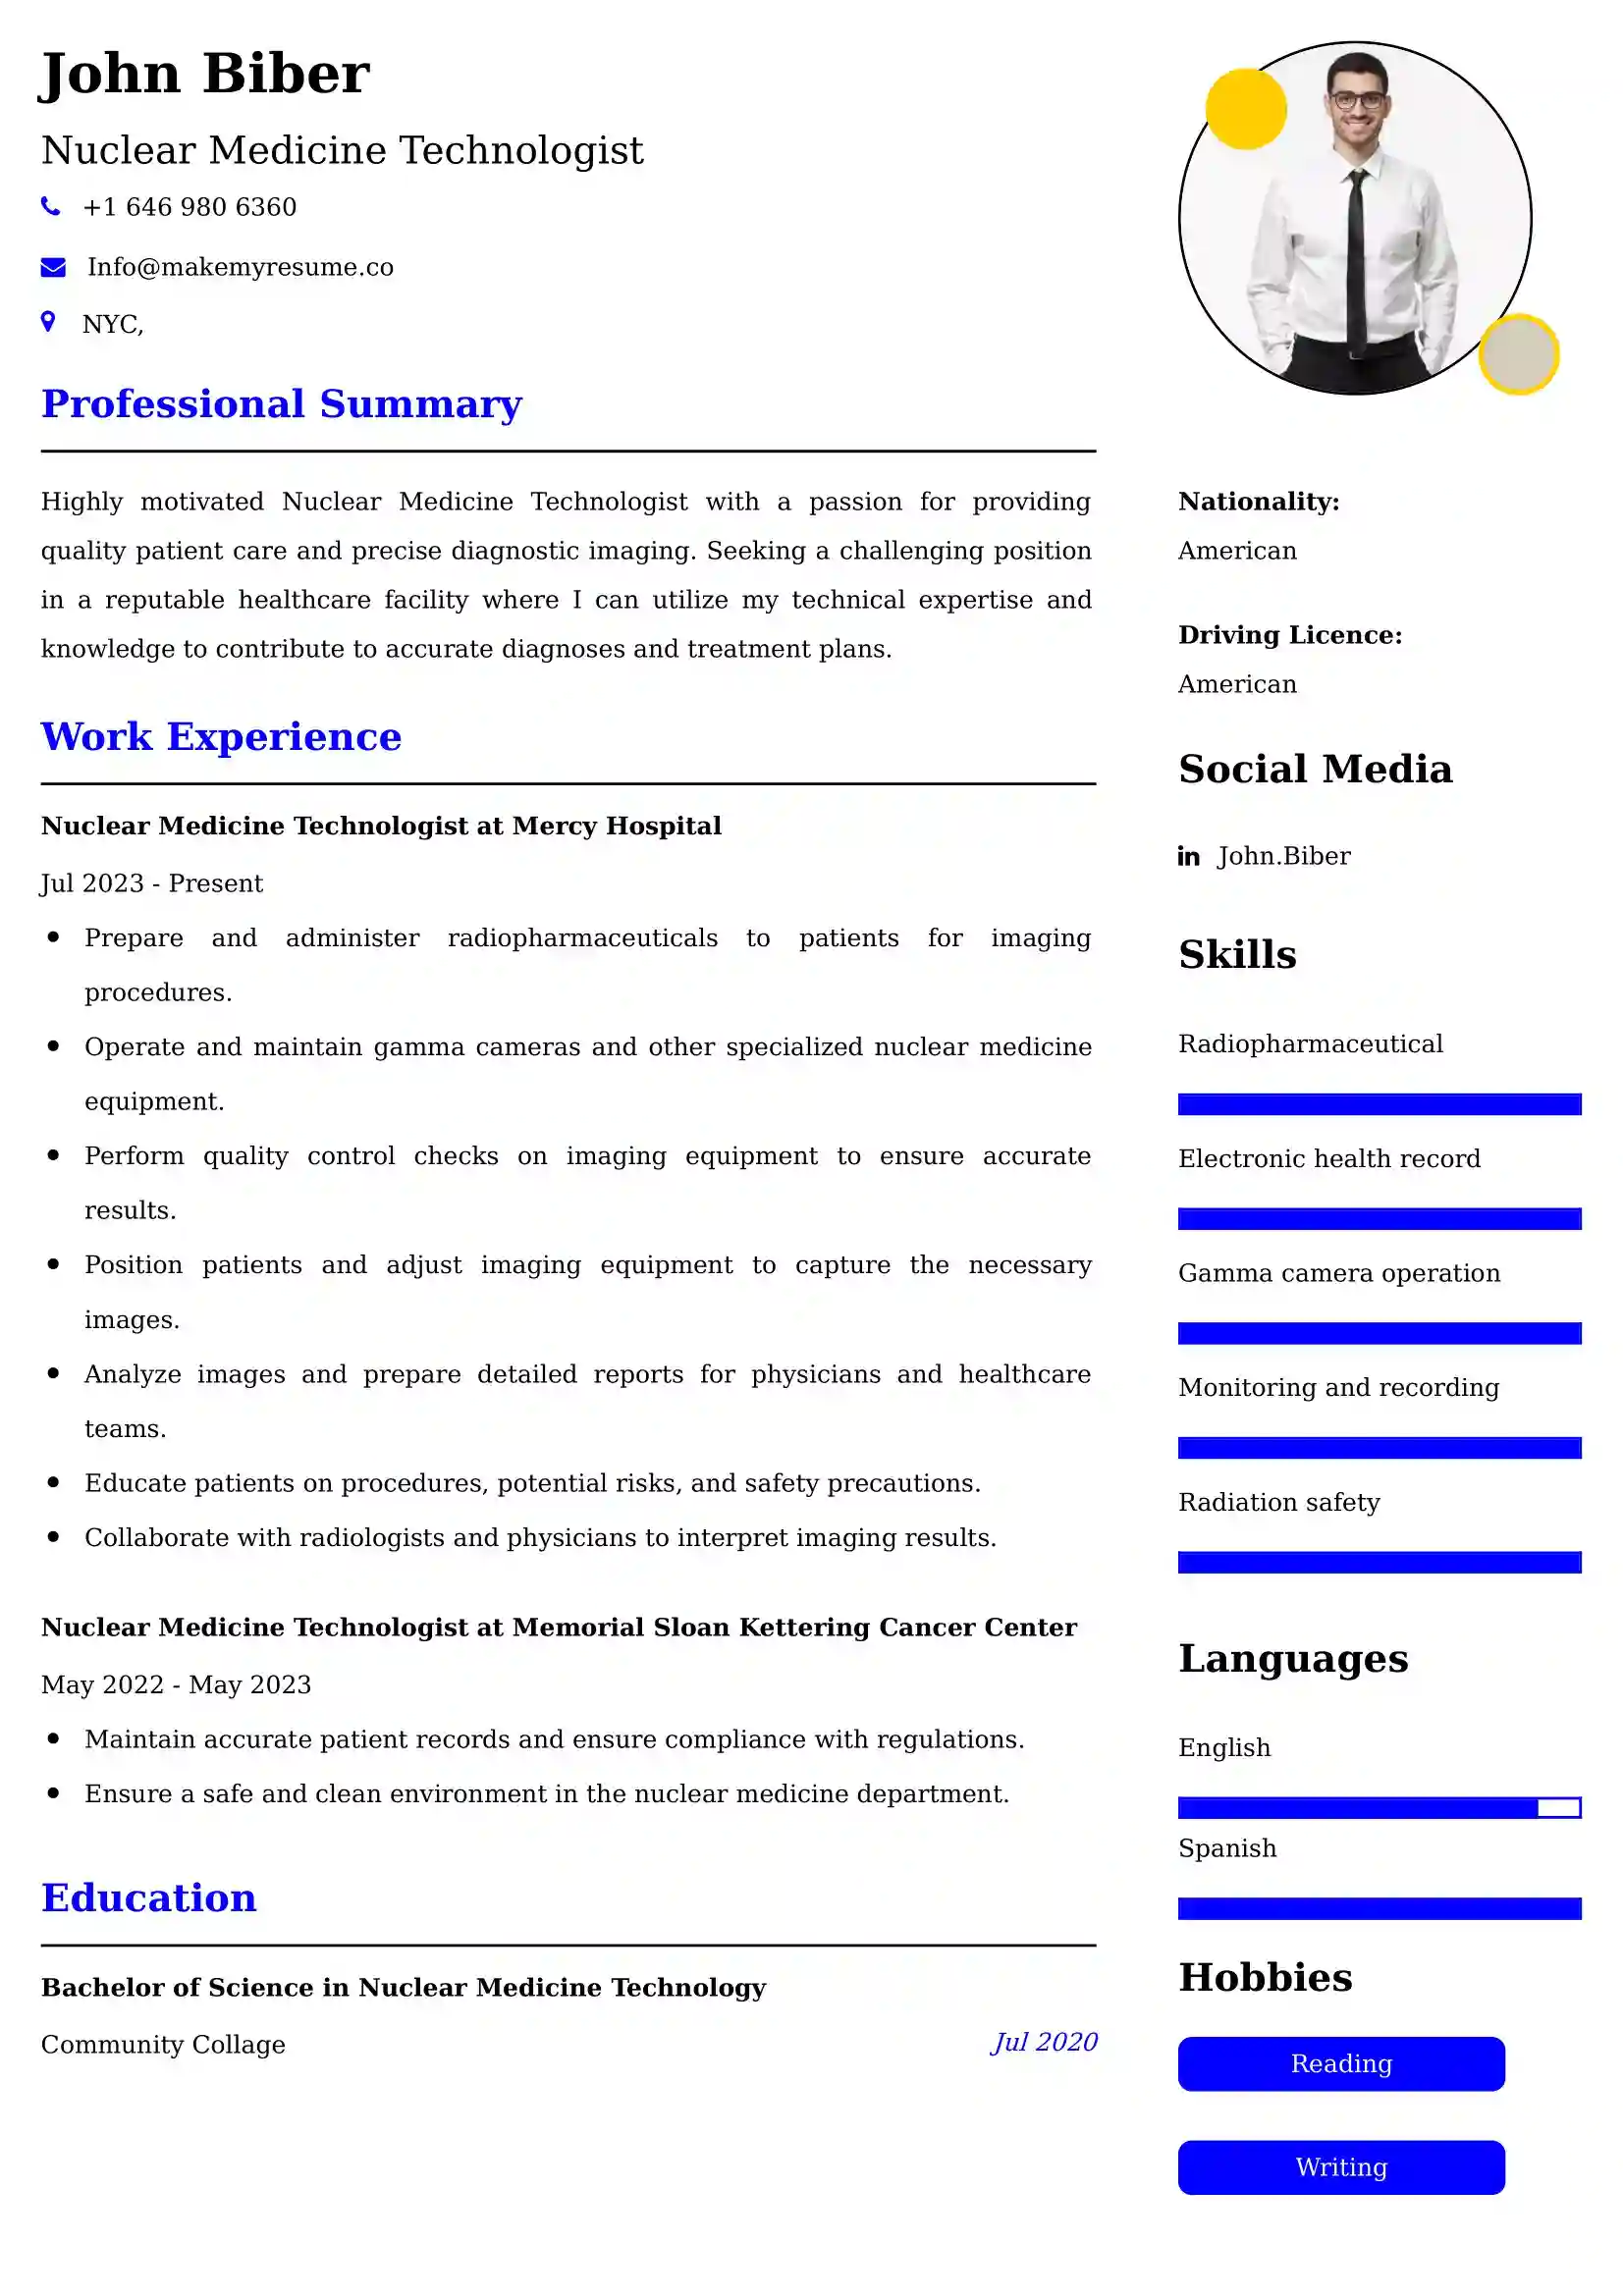 Nuclear Medicine Technologist Resume Examples - UK Format, Latest Template.